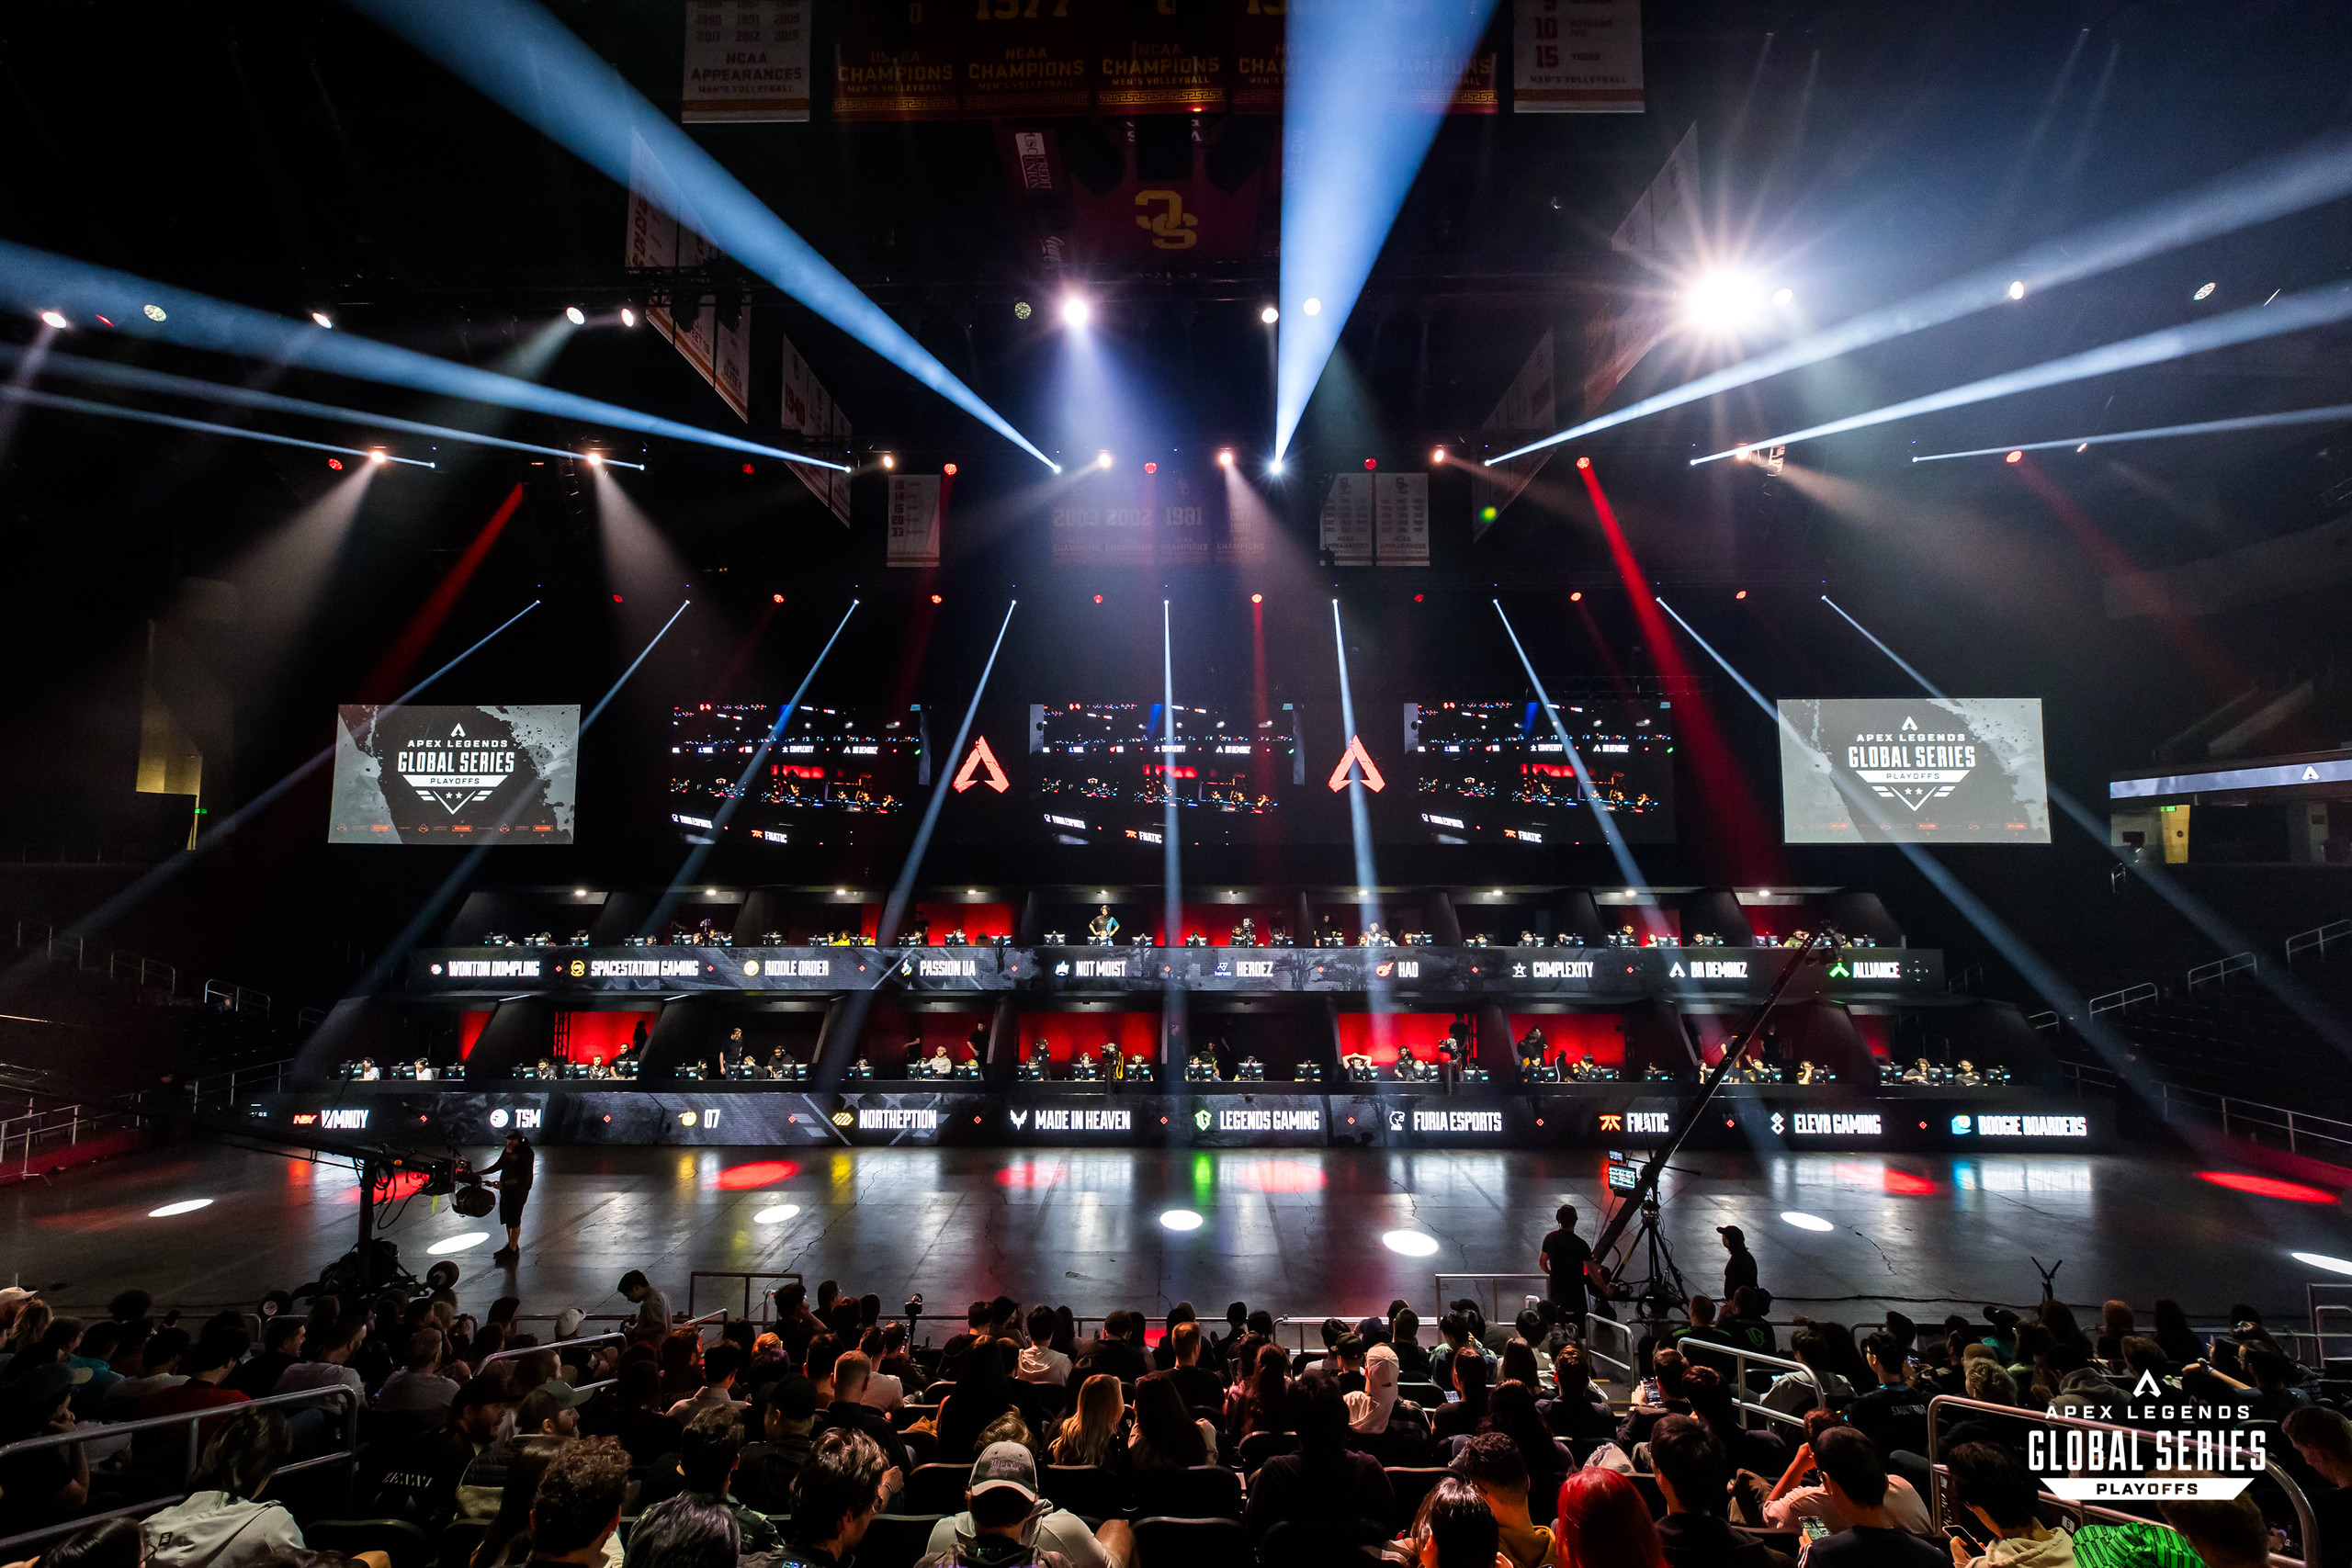 Photograph of a brightly lit stage in the Apex Legends Global Series